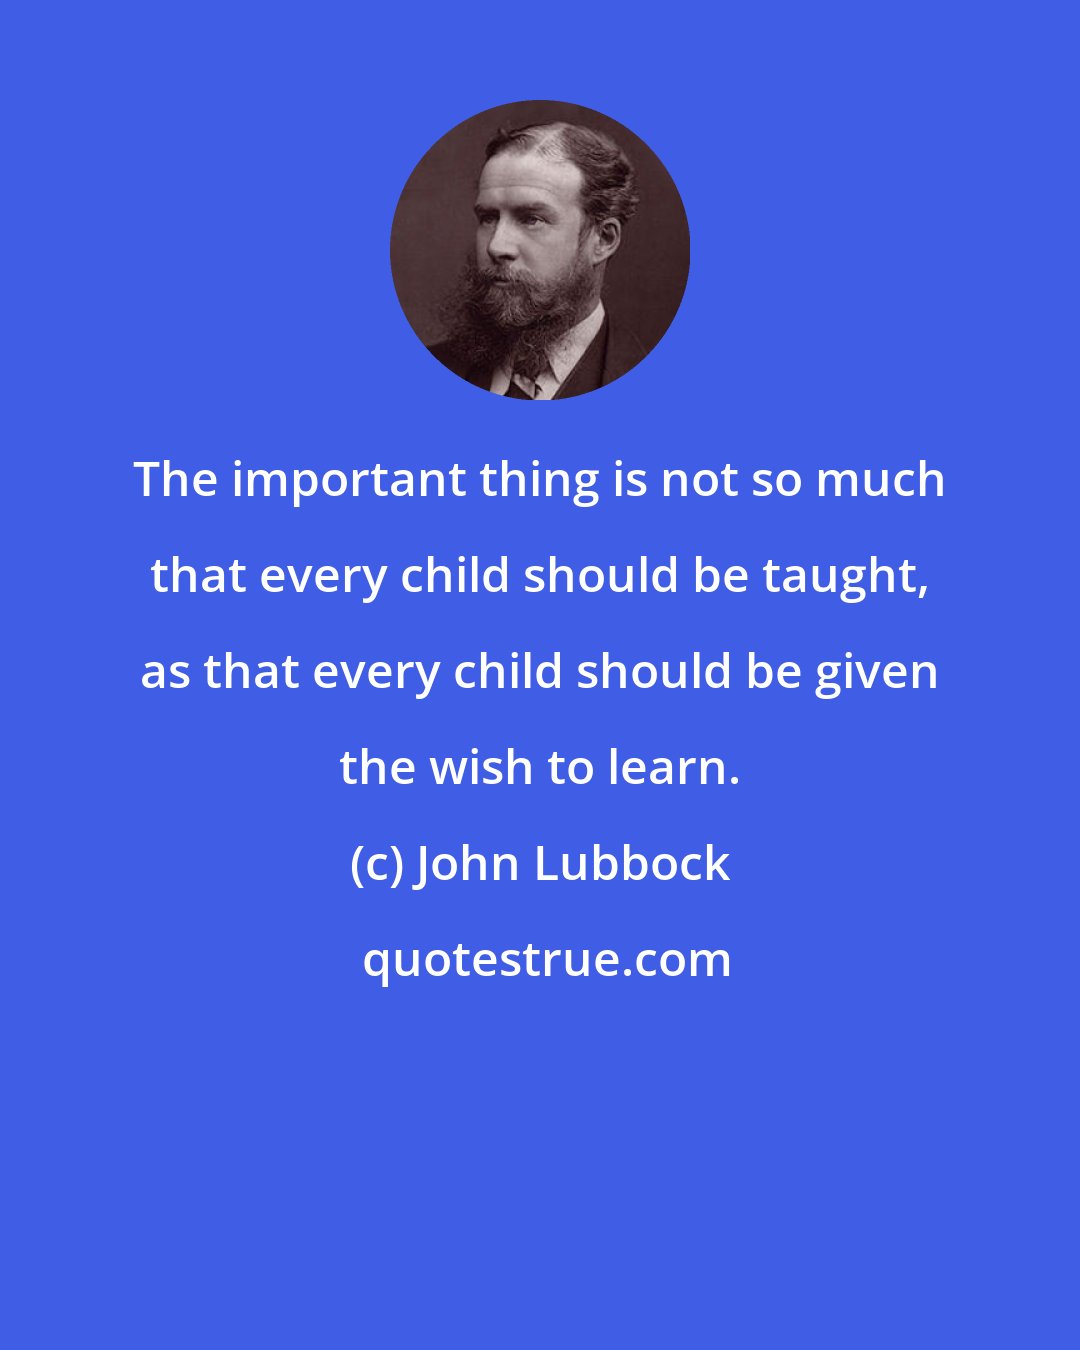 John Lubbock: The important thing is not so much that every child should be taught, as that every child should be given the wish to learn.